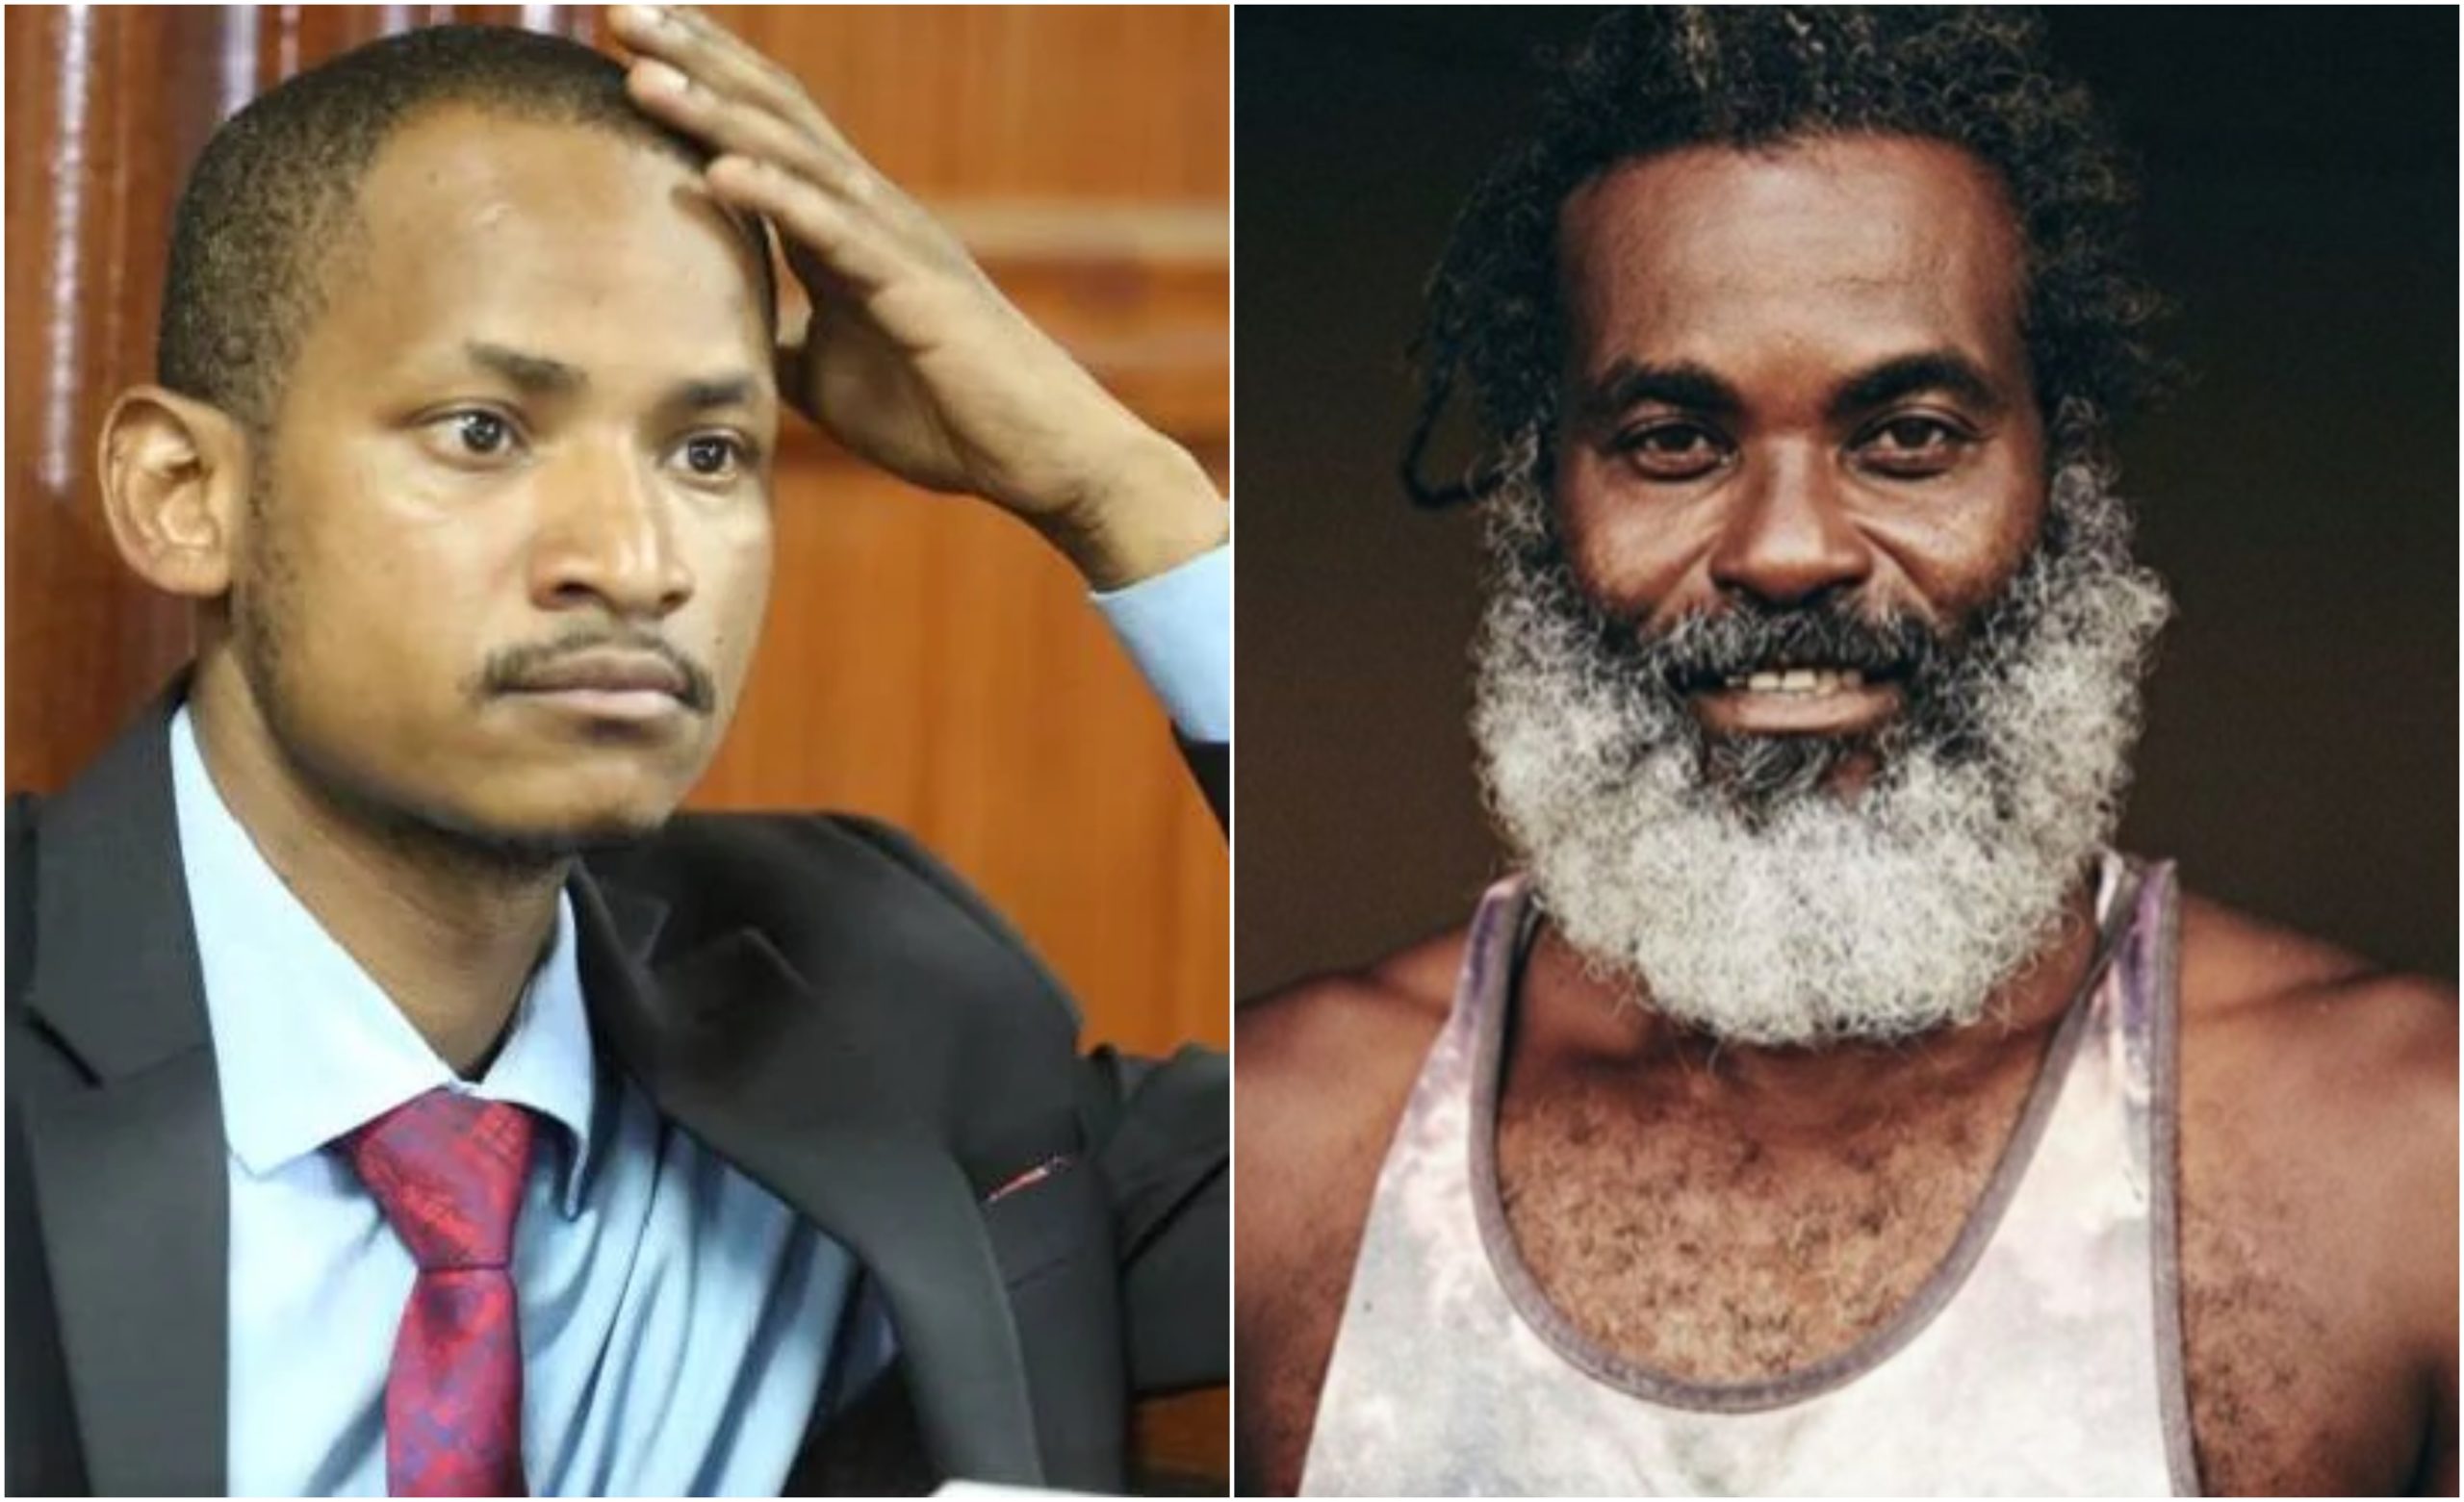 Why Kenyans are rallying behind Omar Lali’s release against Babu Owino’s arrest